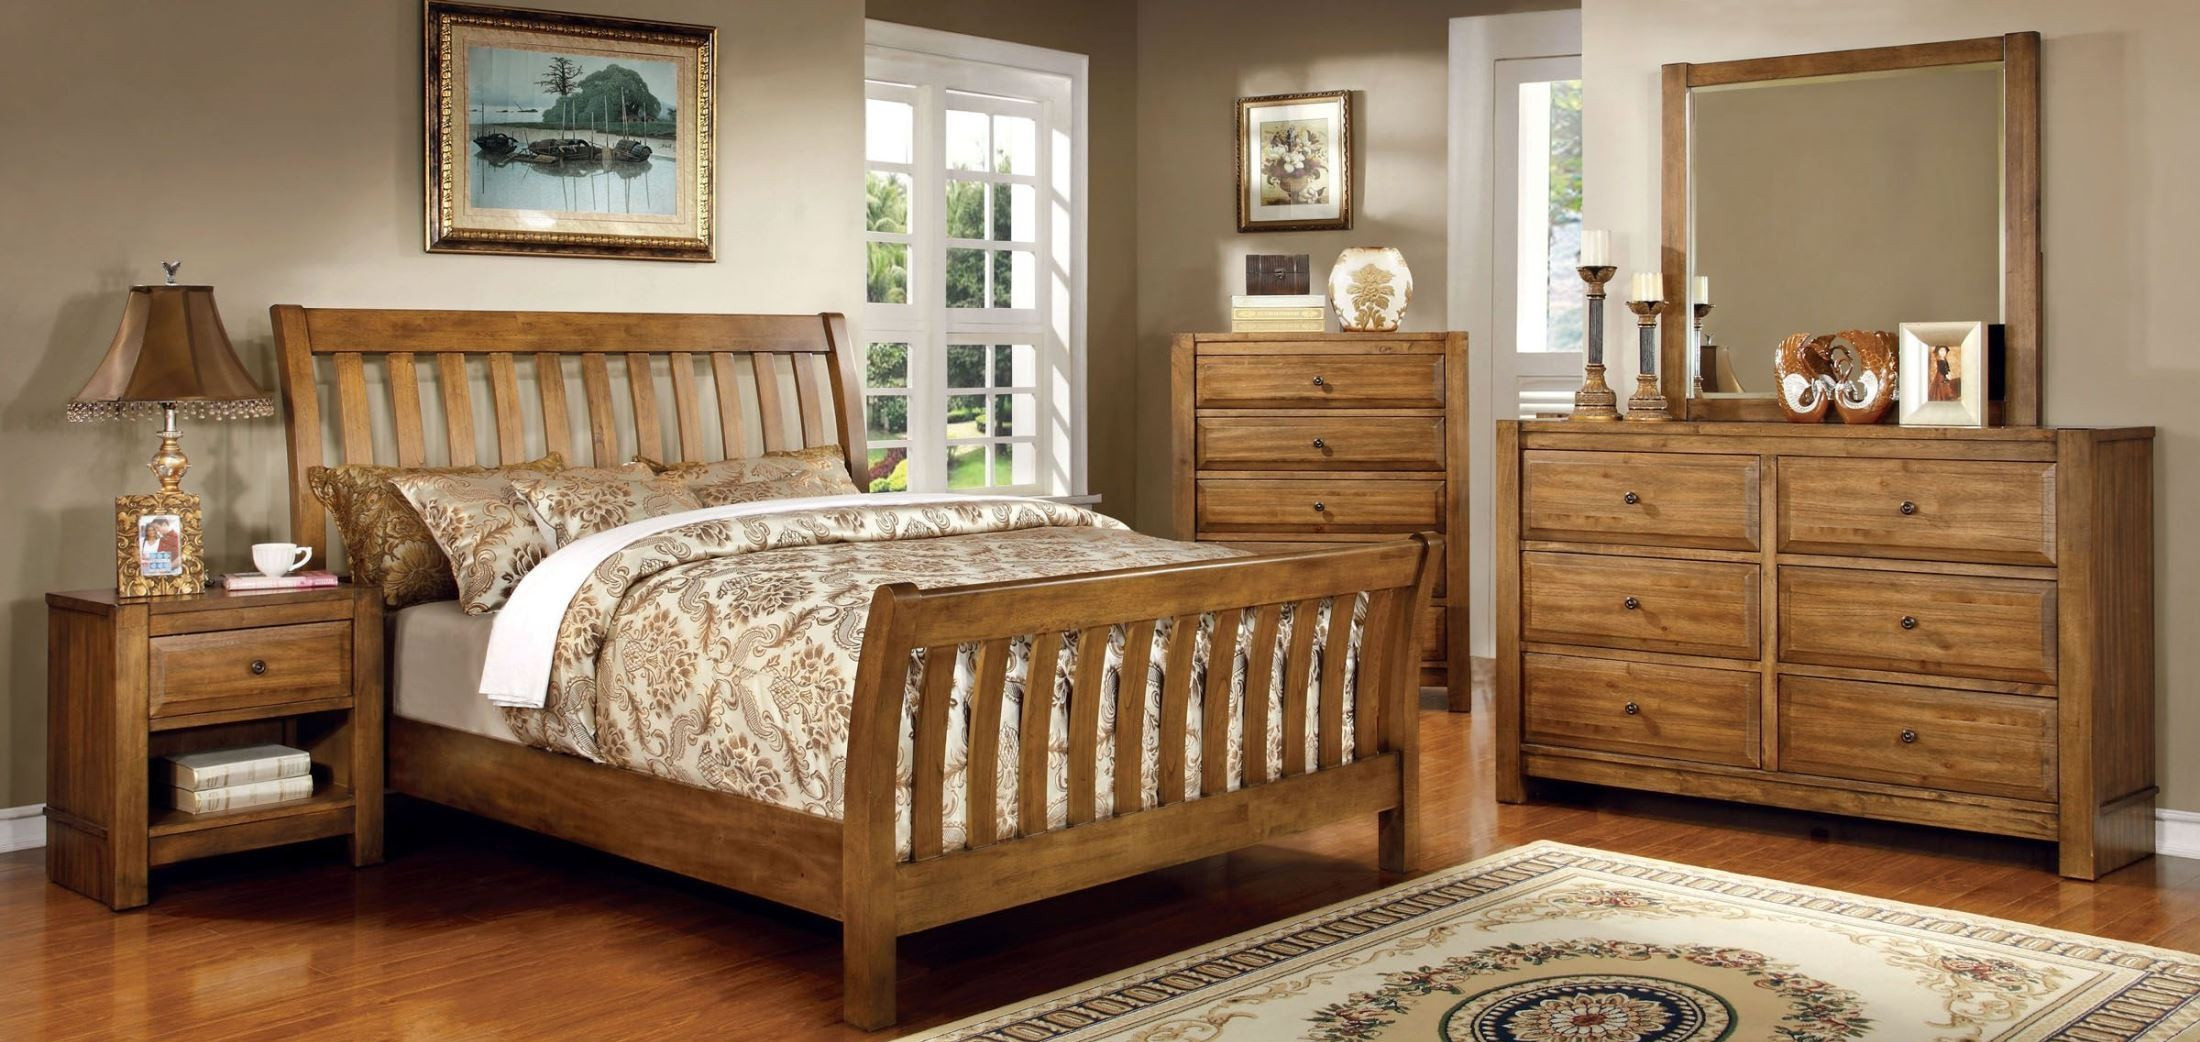 Cheap Rustic Bedroom Furniture Sets
 Conrad Rustic Oak Sleigh Bedroom Set from Furniture of